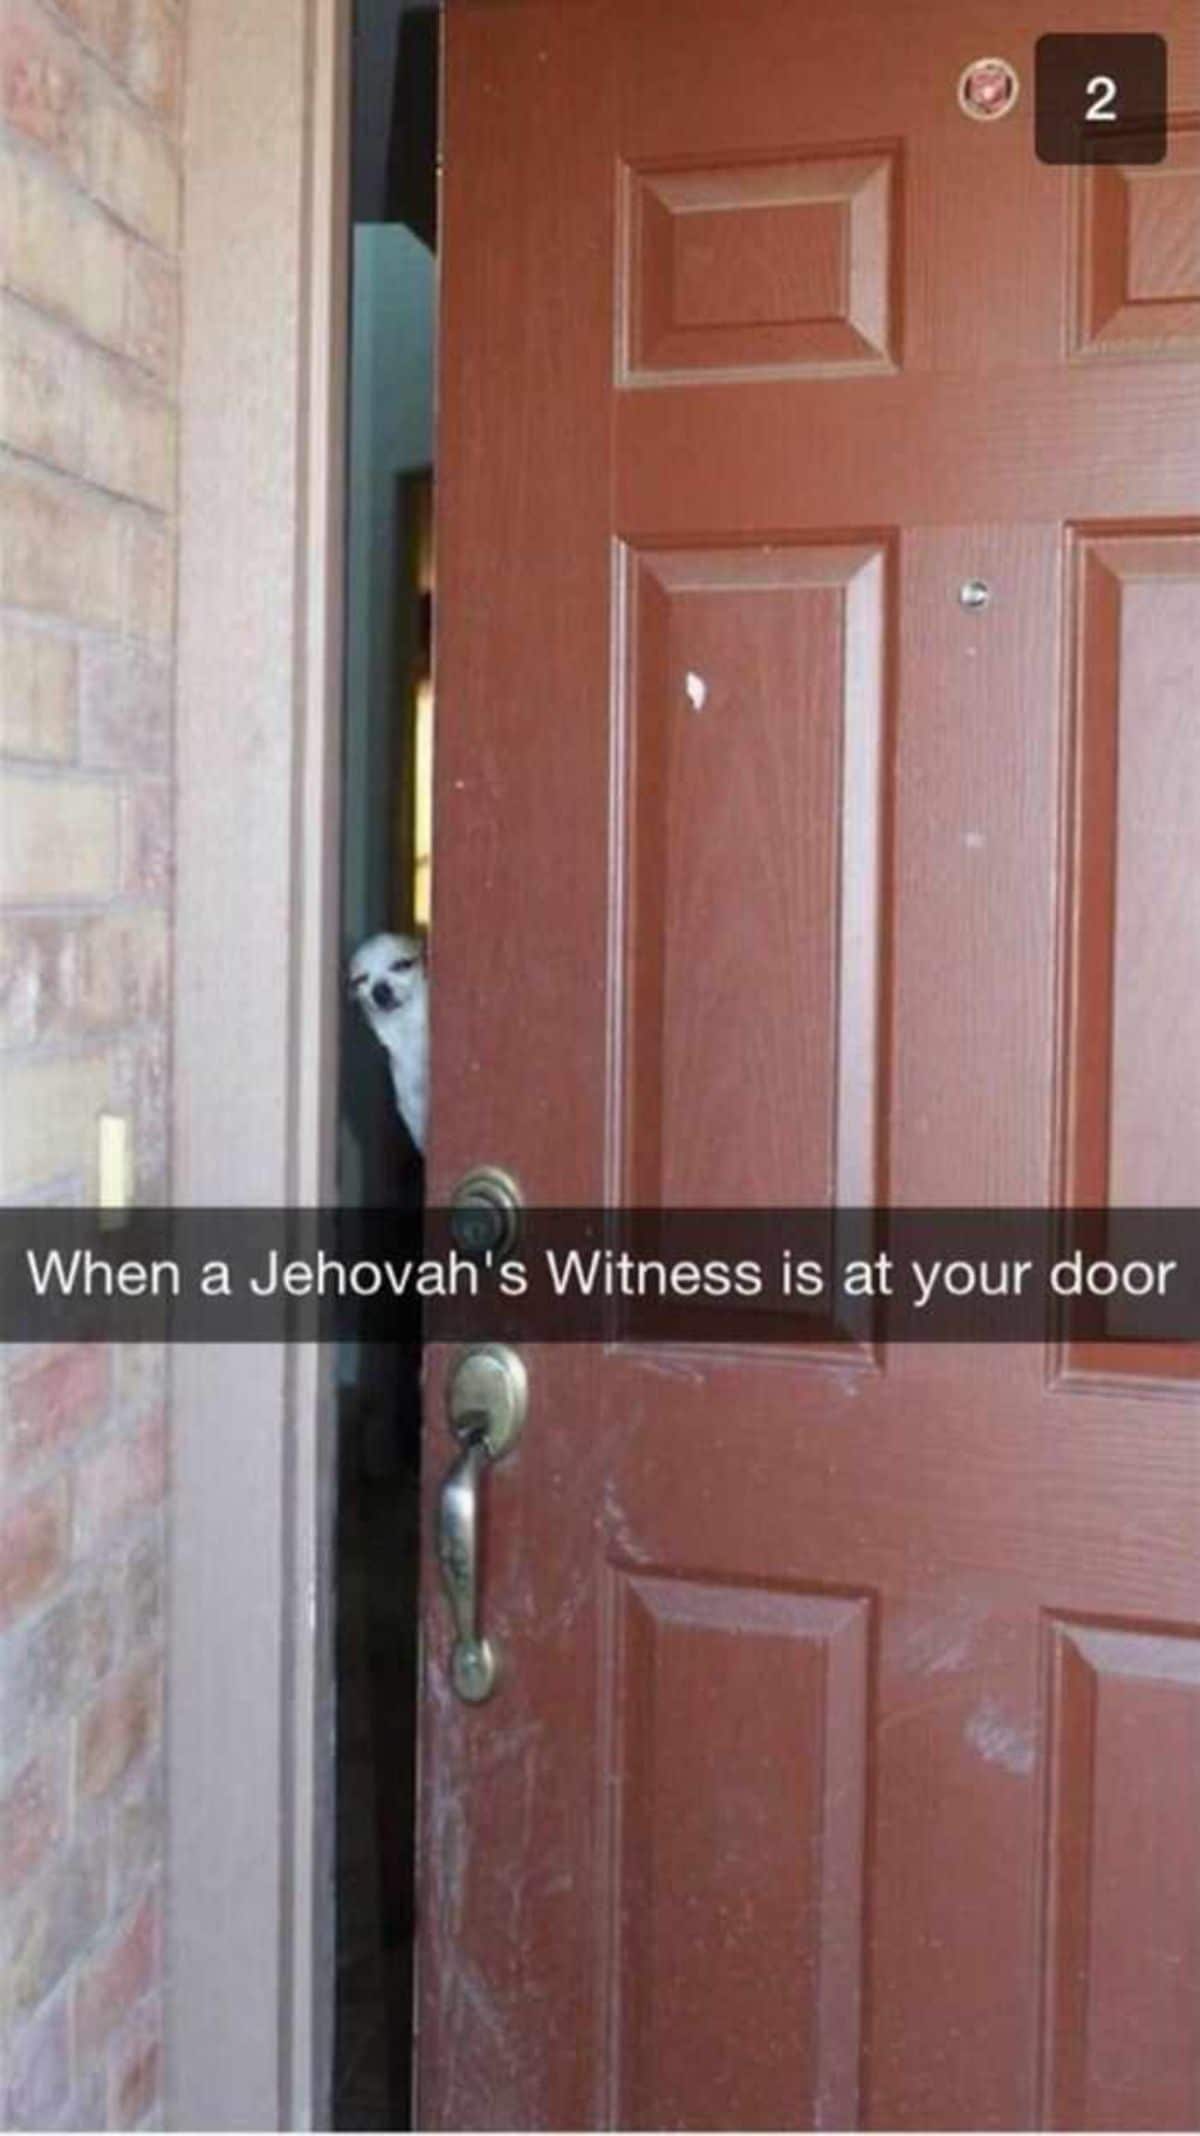 brown and white chihuahua peeking through a brown door left ajar with a caption saying when a Jehova's Witness is at your door